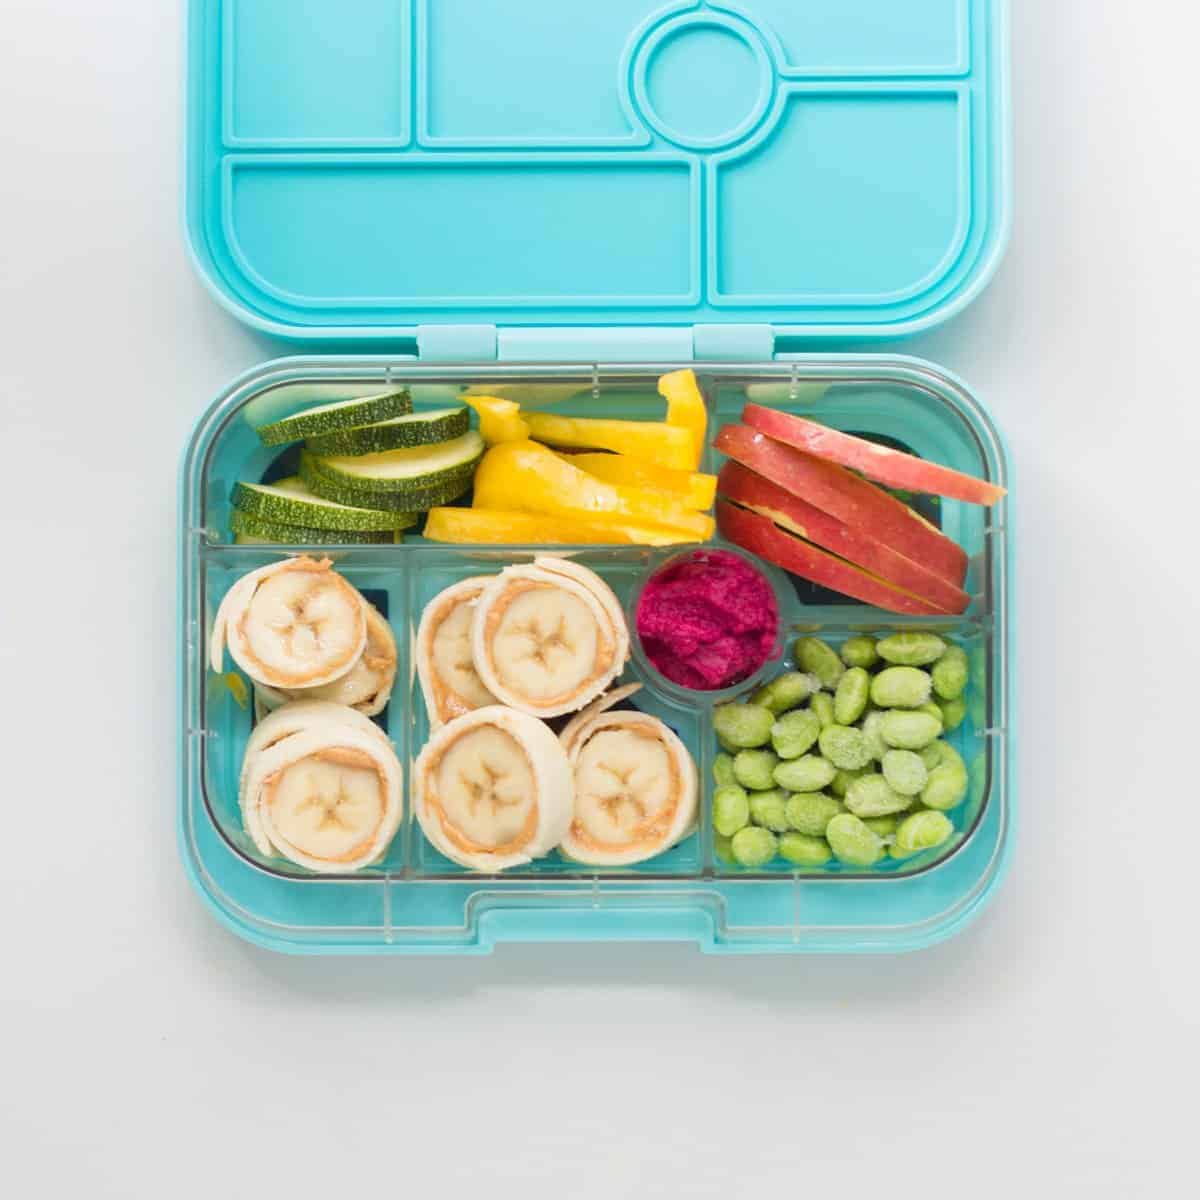 pb banana roll ups in a blue lunchbox with sliced zucchini, bell peppers, apple slices, edamame, and beet hummus.